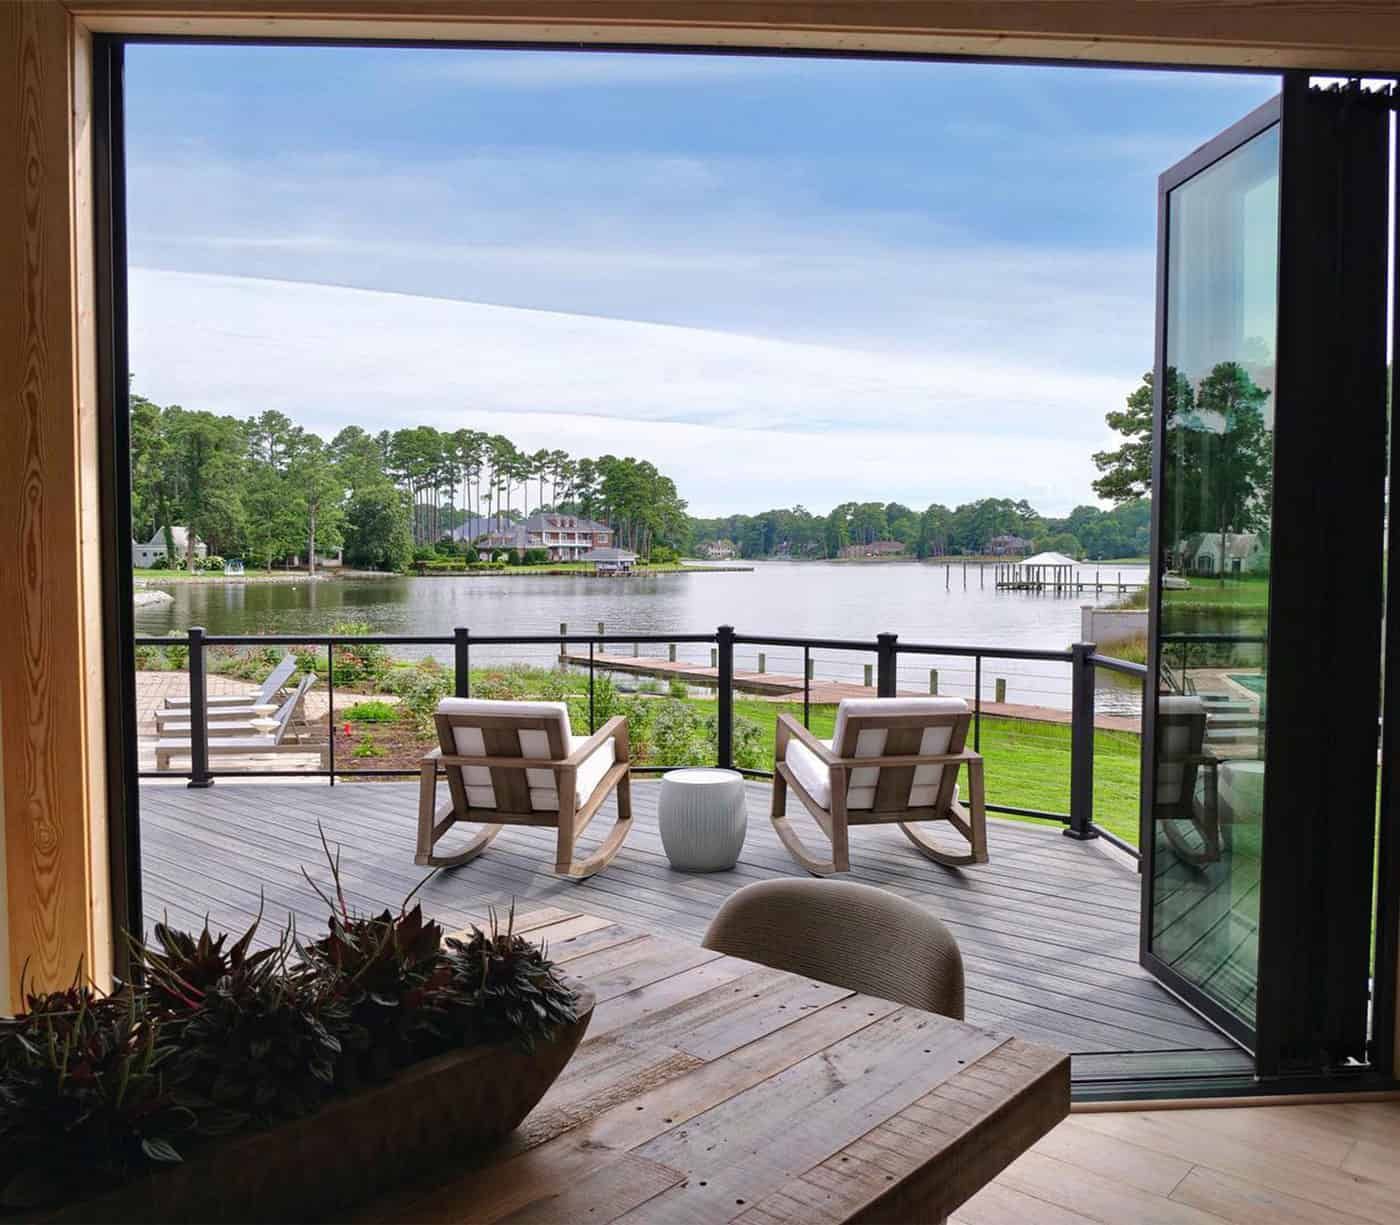 An image of a scenic view captured from a deck built by Solid Structures